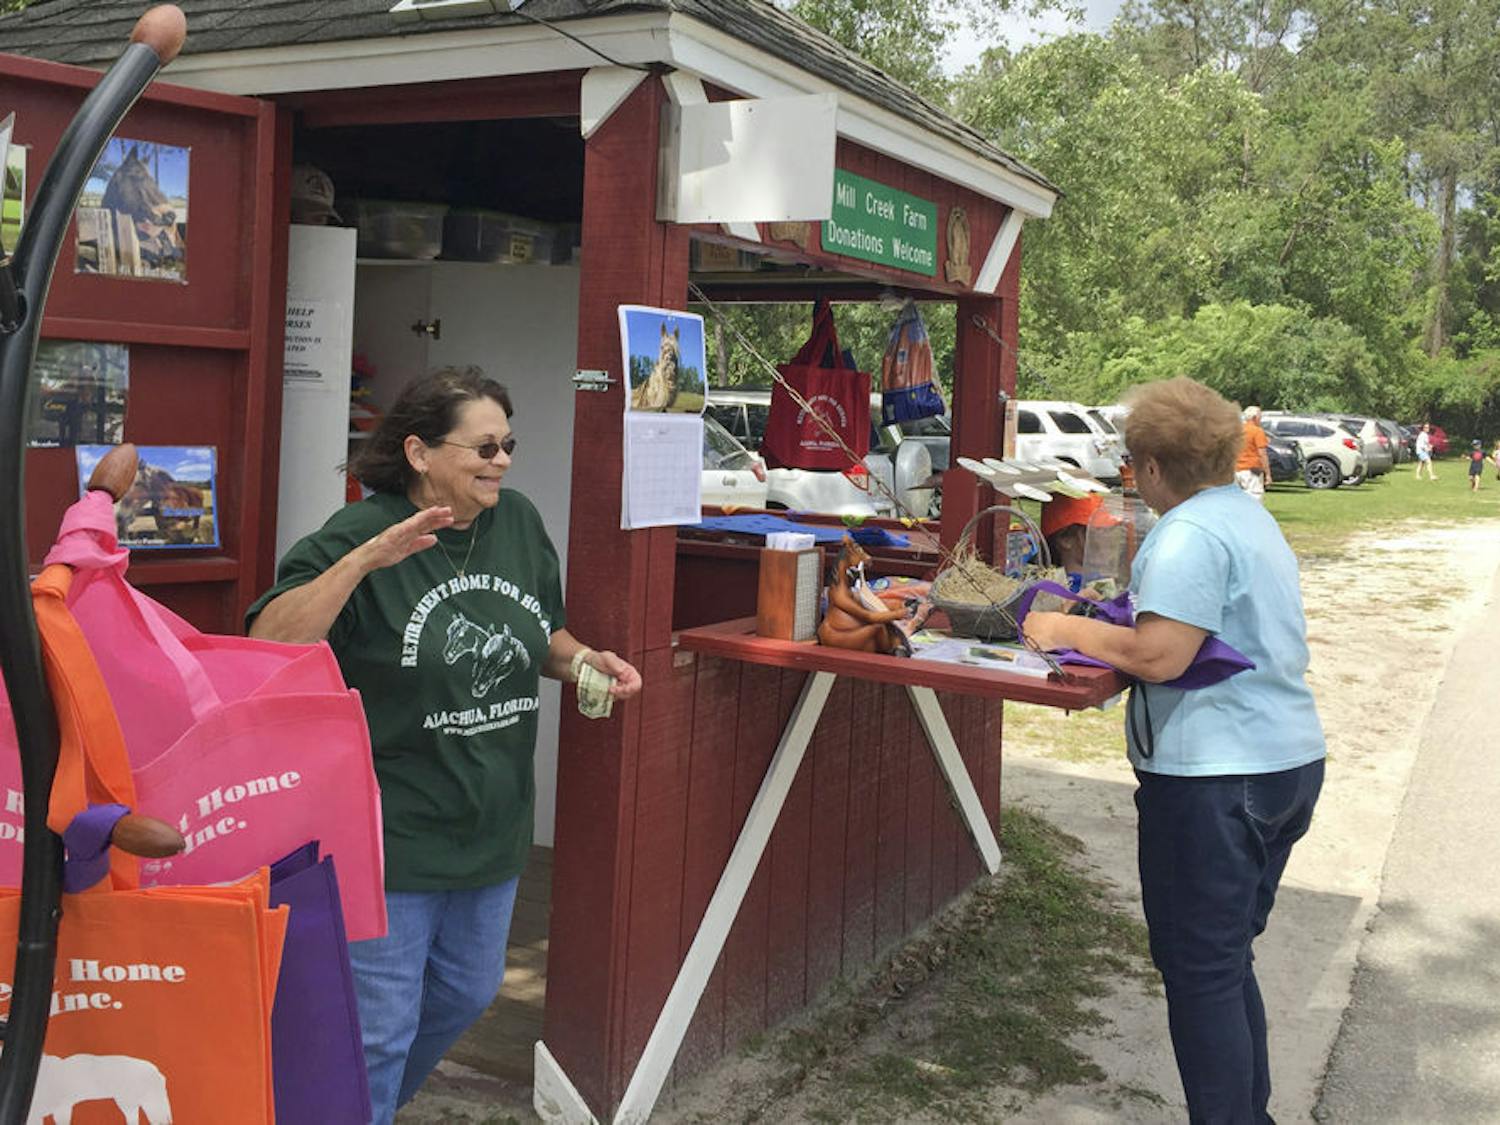 Lynne Brennan, a volunteer at Mill Creek since July 2012, greets a visitor at the farm. Brennan typically works the welcome kiosk on Saturdays.